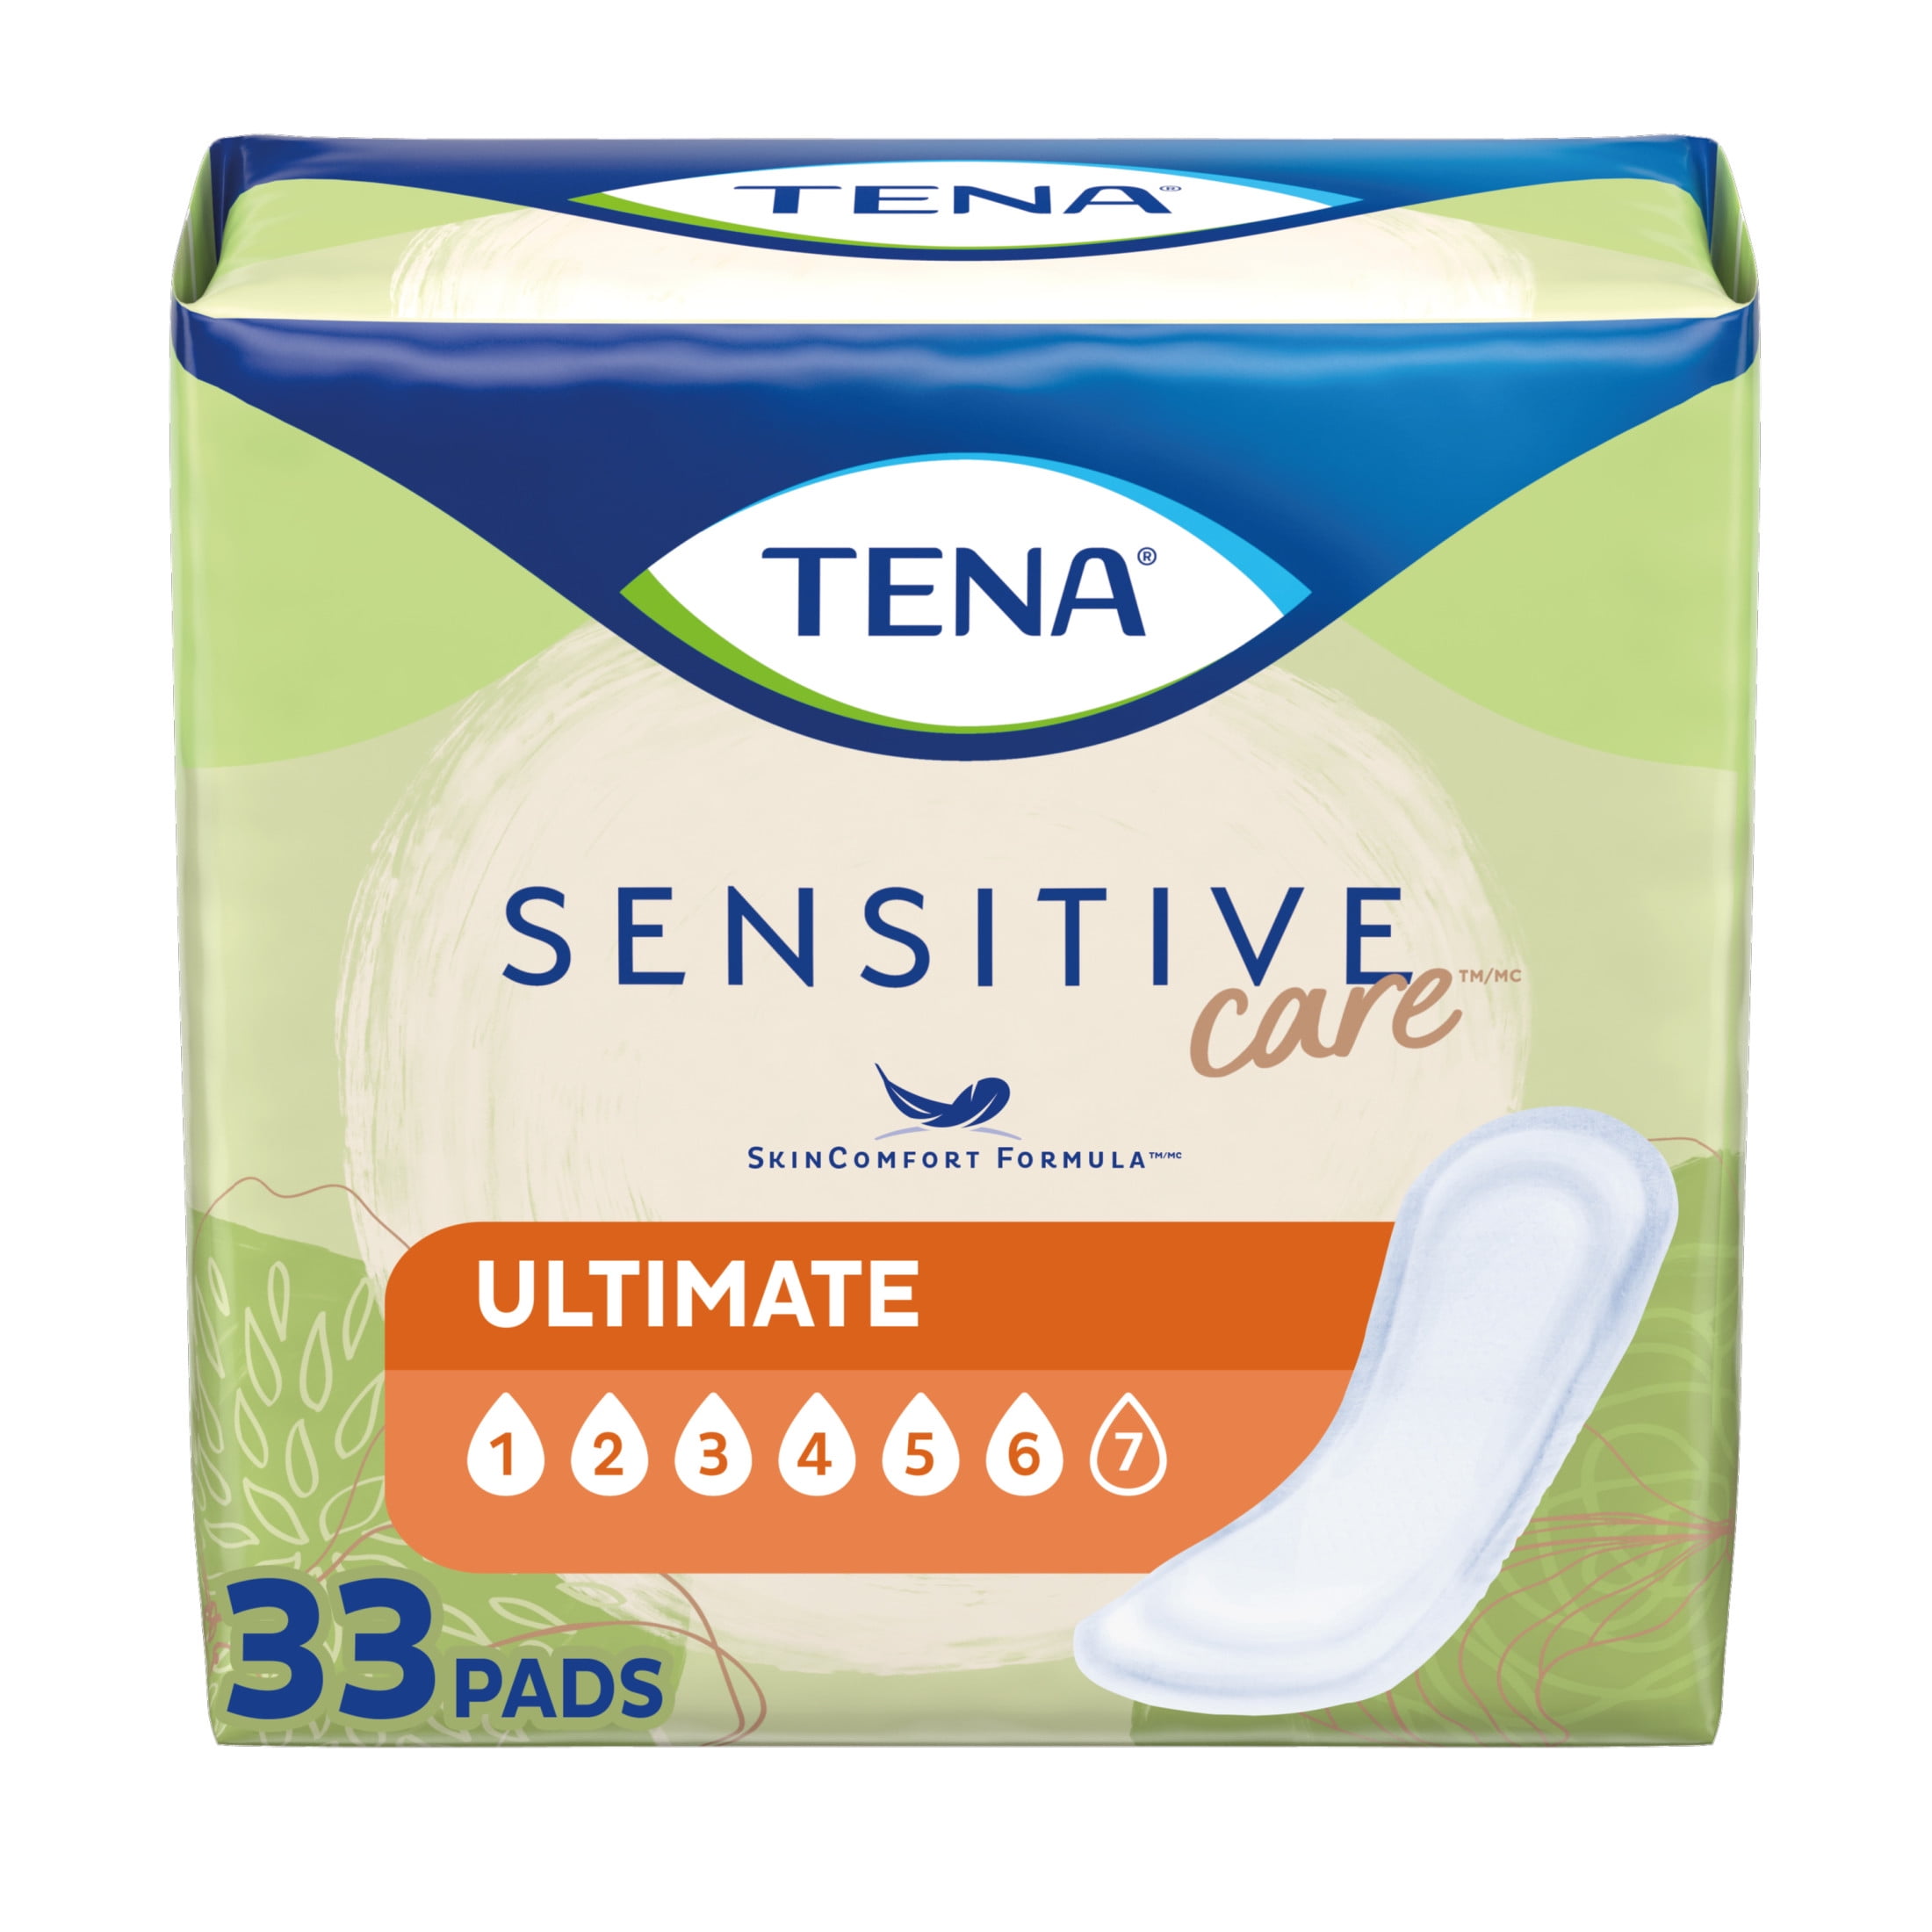 Tena Sensitive Care Ultimate Absorbency Incontinence Pad for Women, 33ct